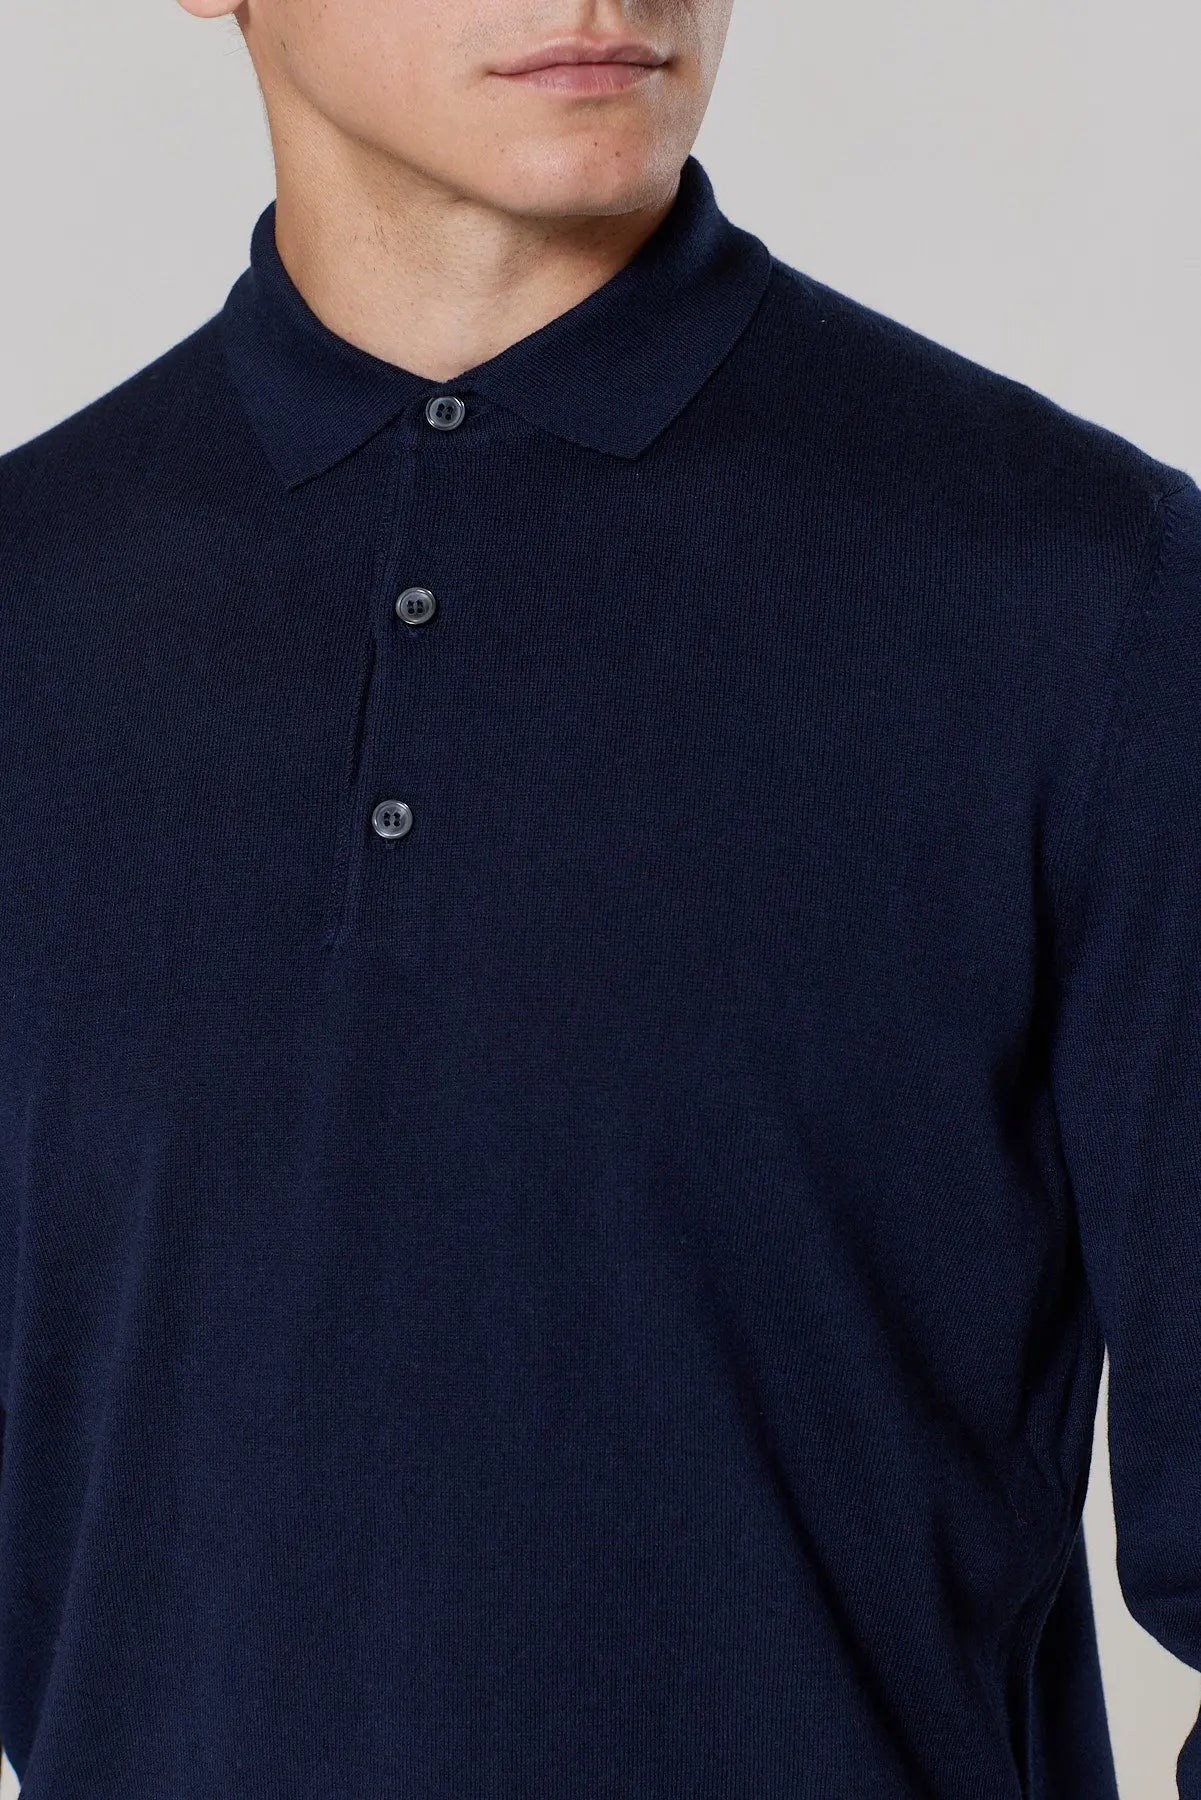 Cable Polo Shirt - Navy knitwear